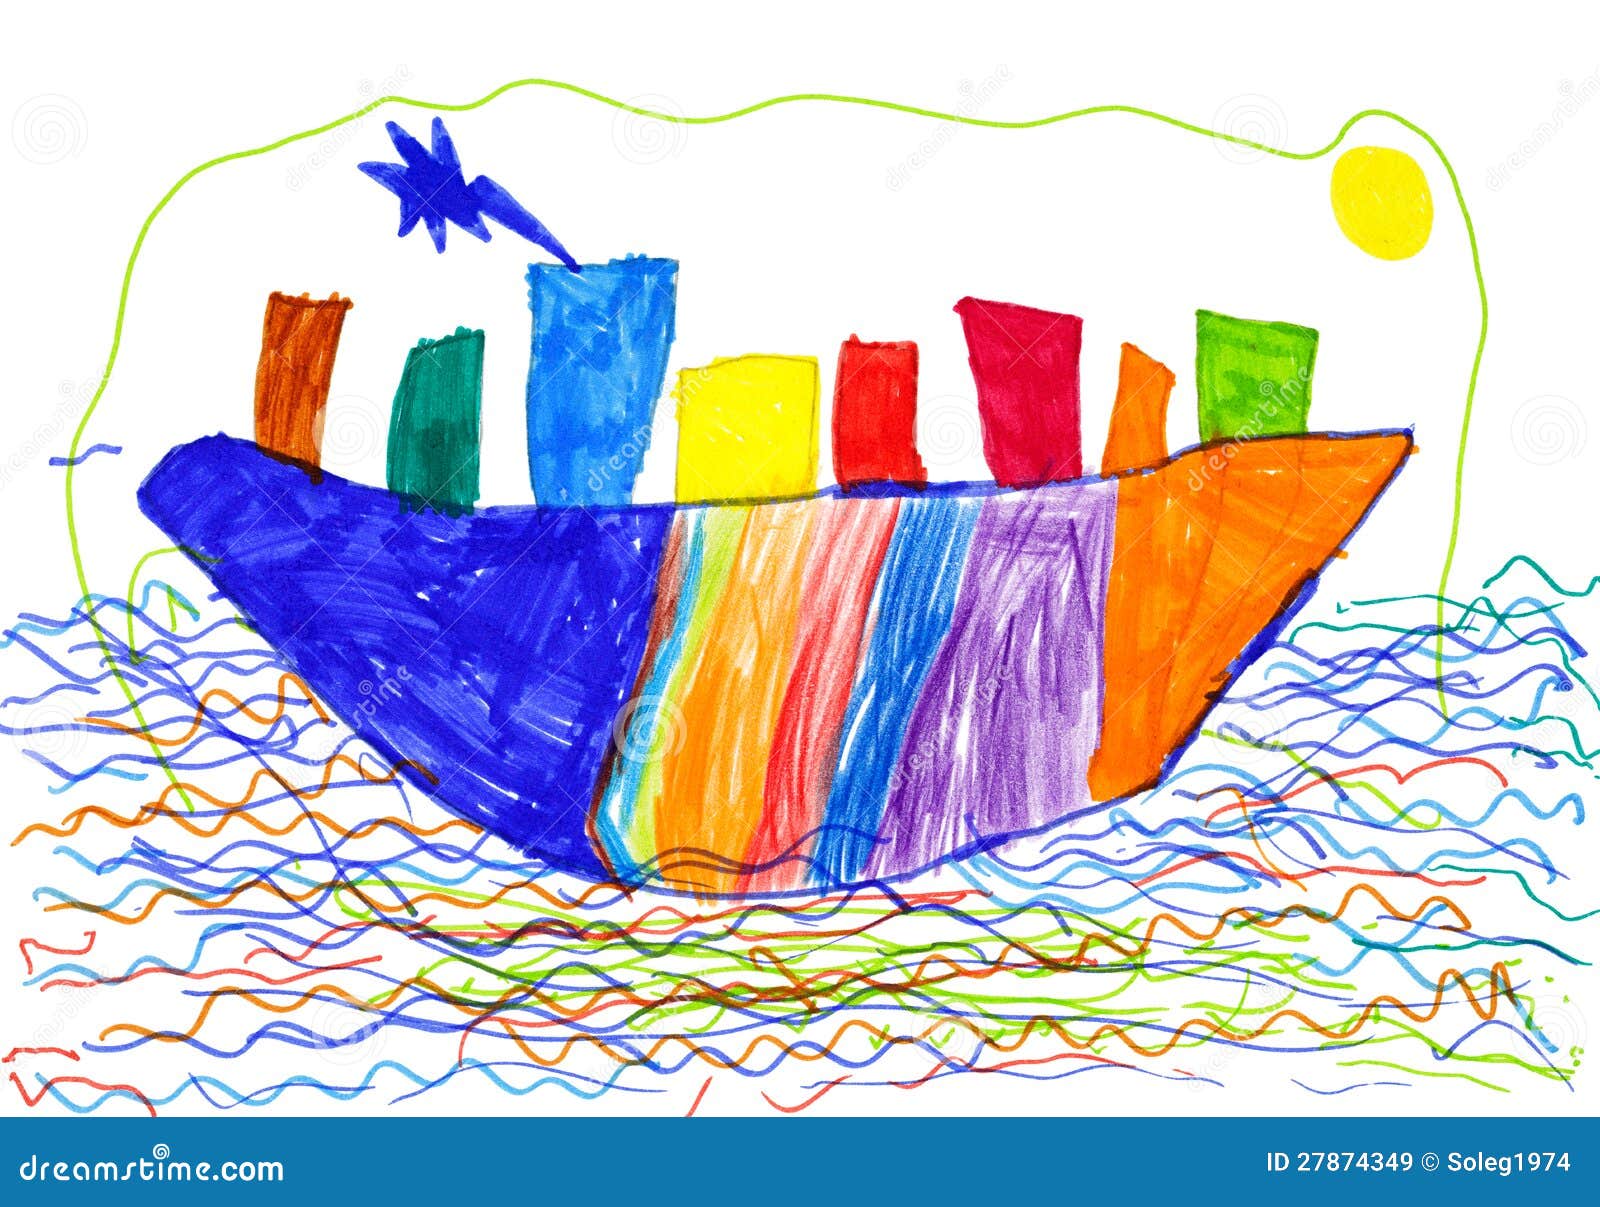 9,410 Childish Boat Royalty-Free Photos and Stock Images | Shutterstock